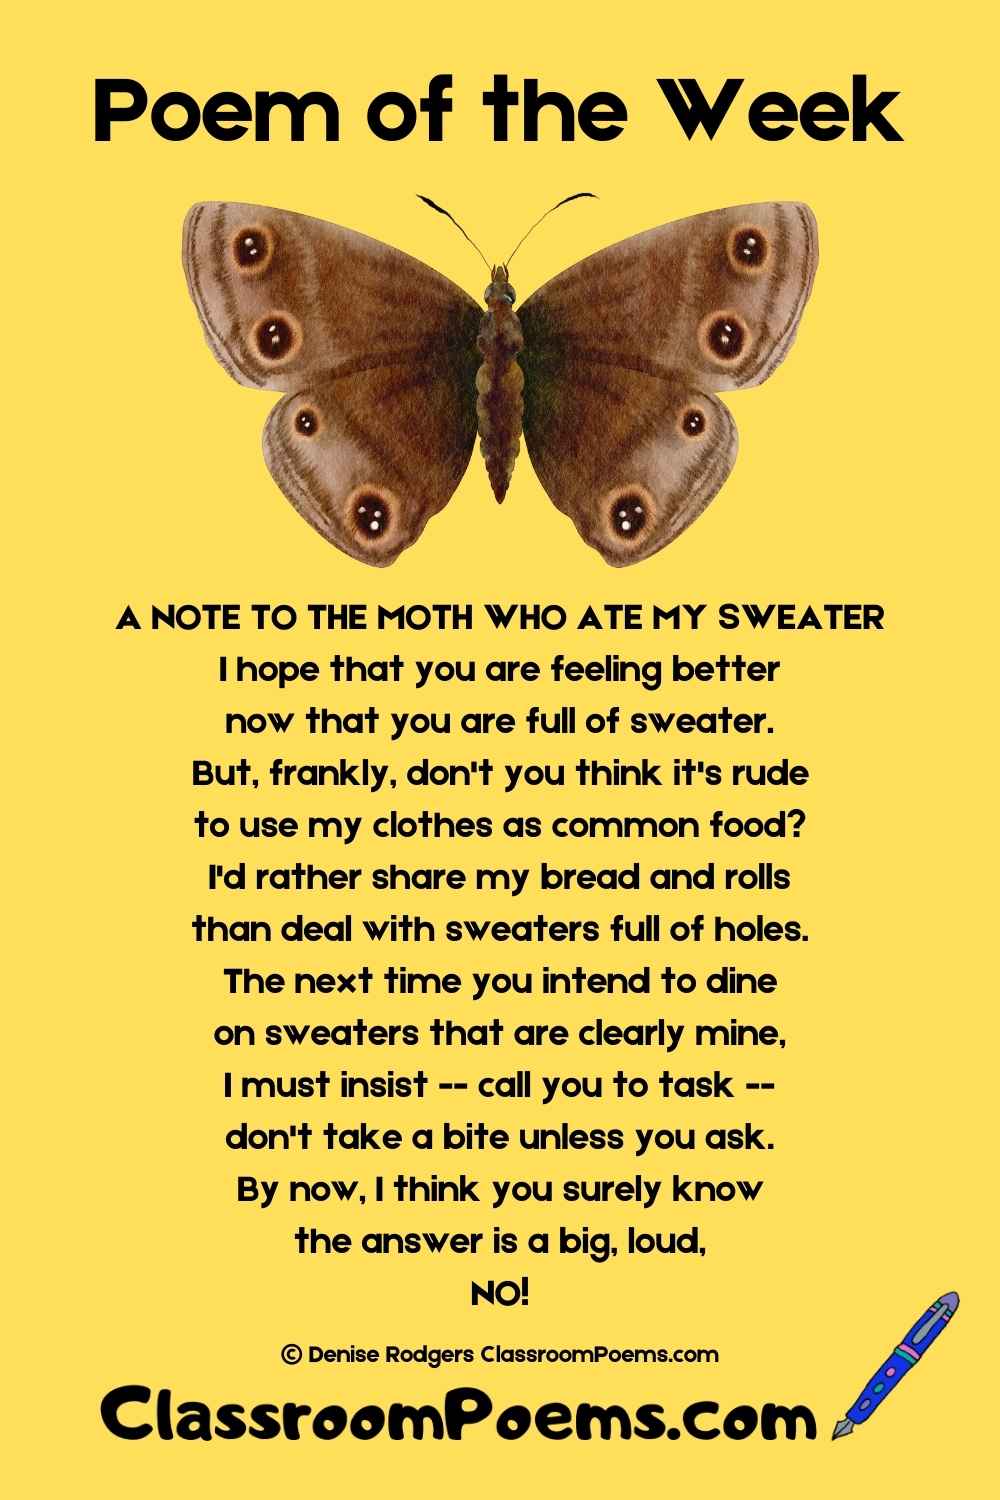 A Note to the Moth Who Ate My Sweater, a poem by Denise Rodgers on ClassroomPoems.com.